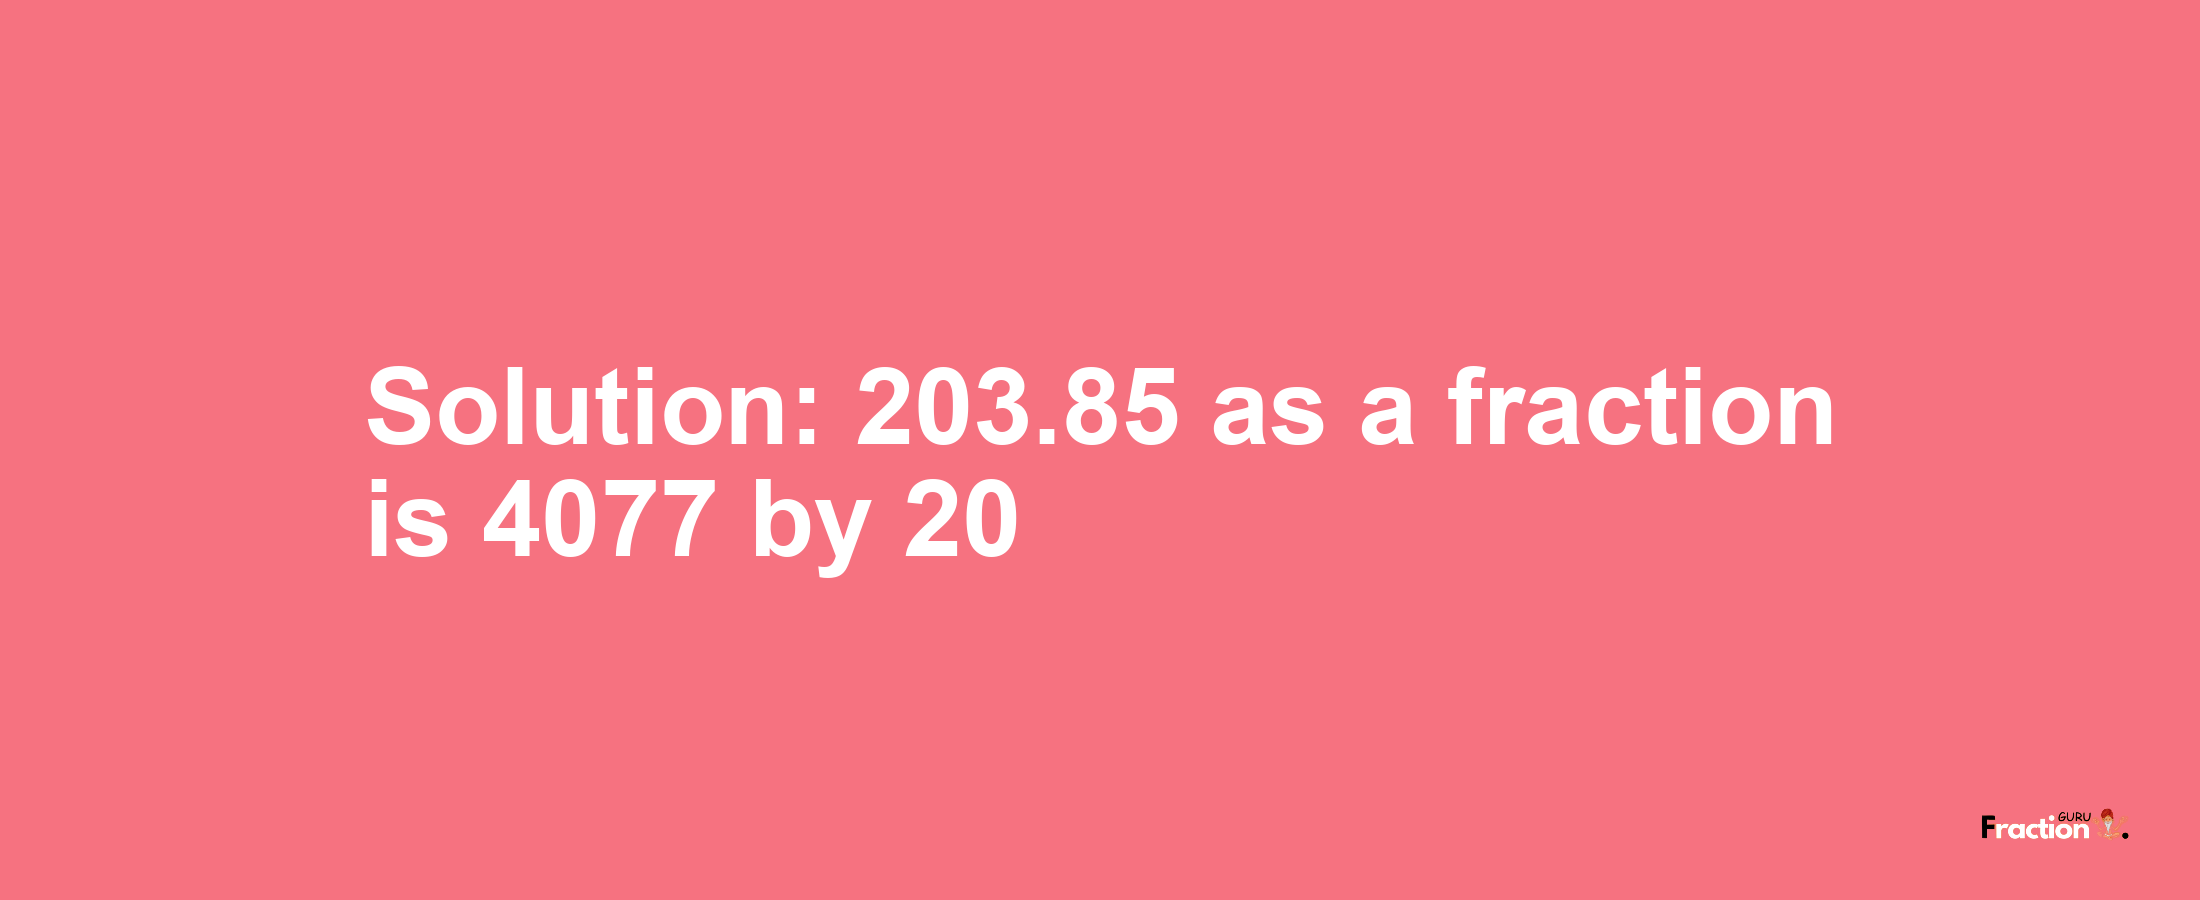 Solution:203.85 as a fraction is 4077/20